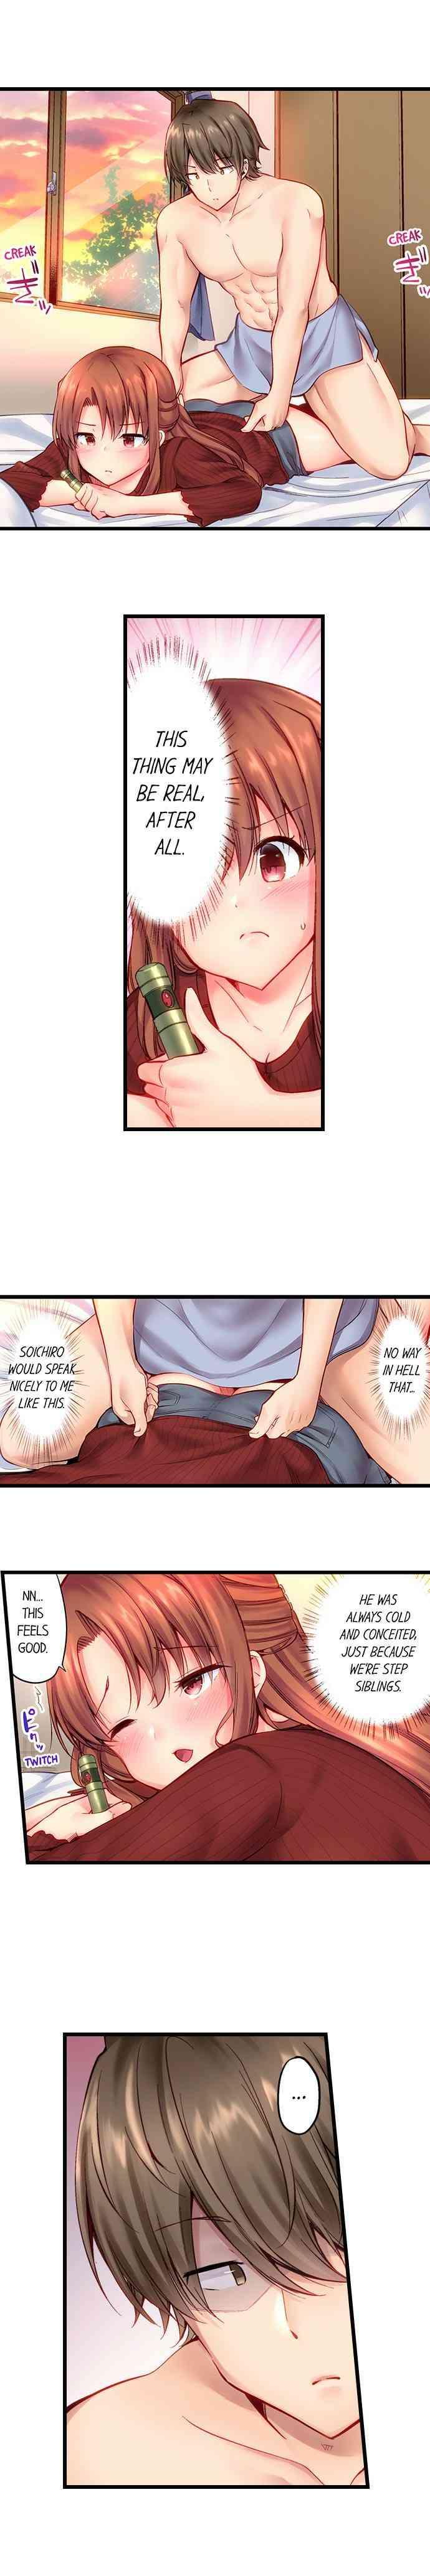 Verification "Hypnotized" Sex with My Brother Ch.21/? Verga - Page 10